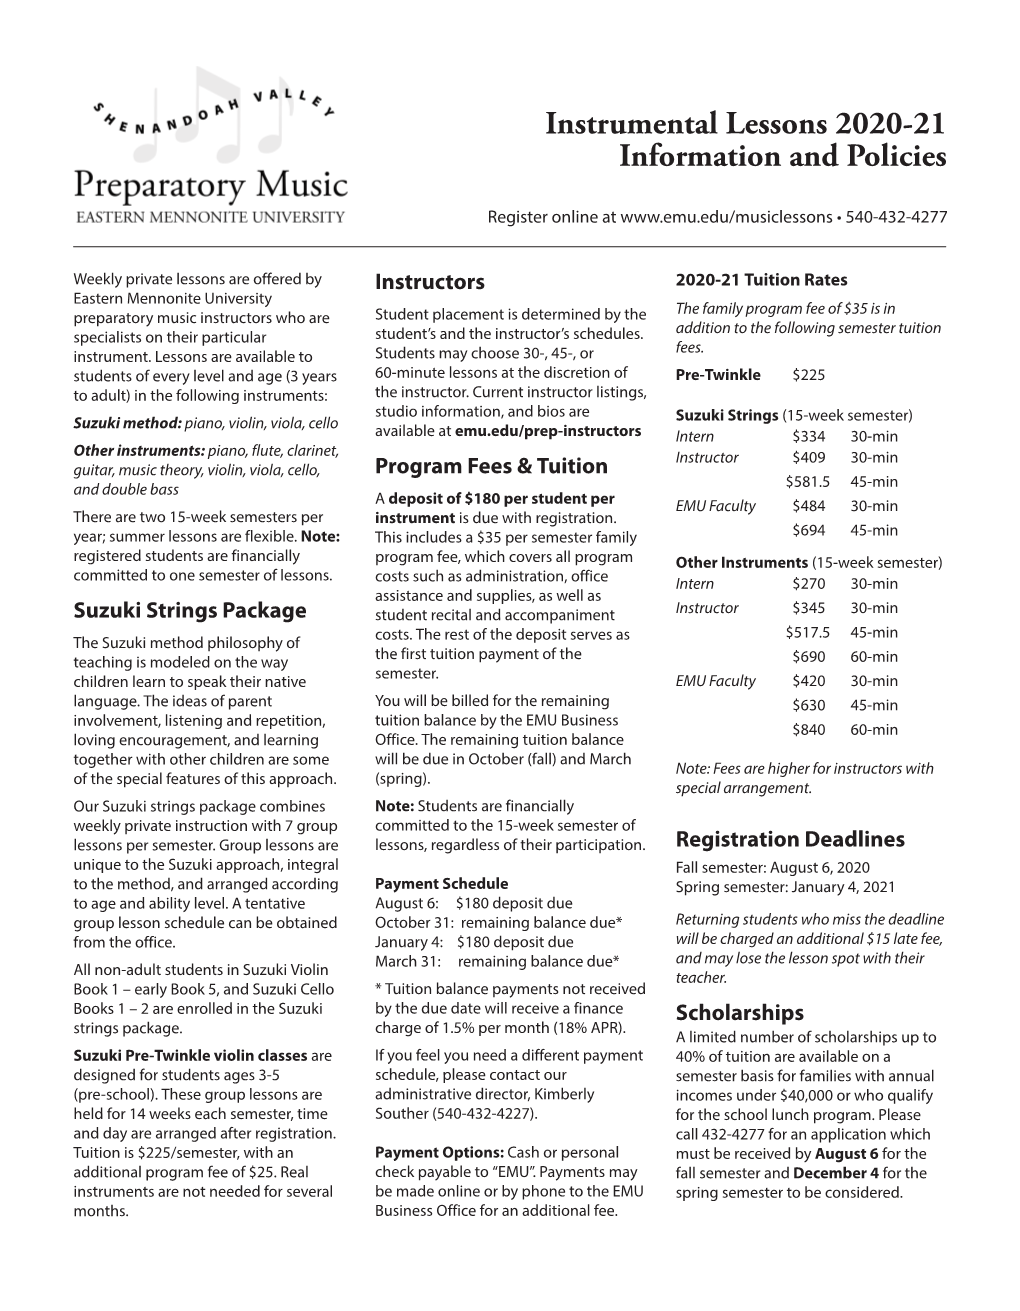 Instrumental Lessons 2020-21 Information and Policies